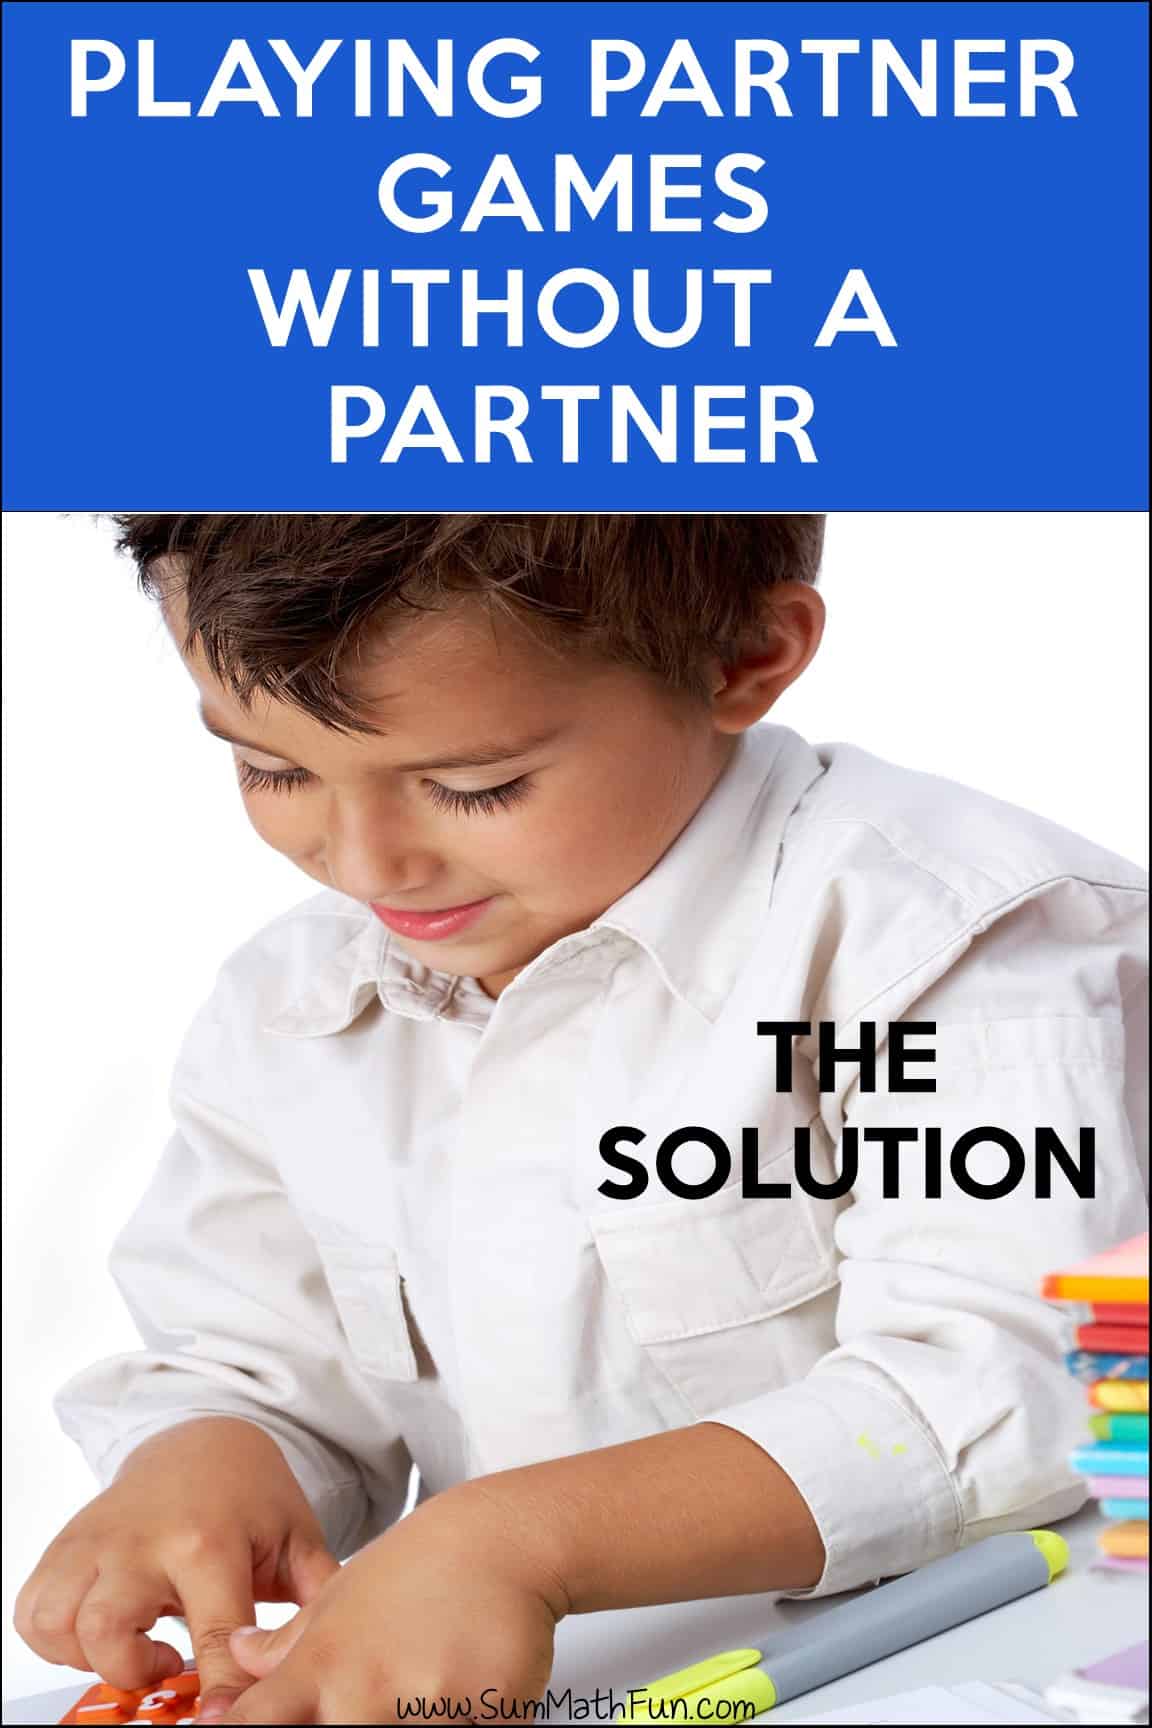 Partner Games Without a Partner - A Game Time Solution